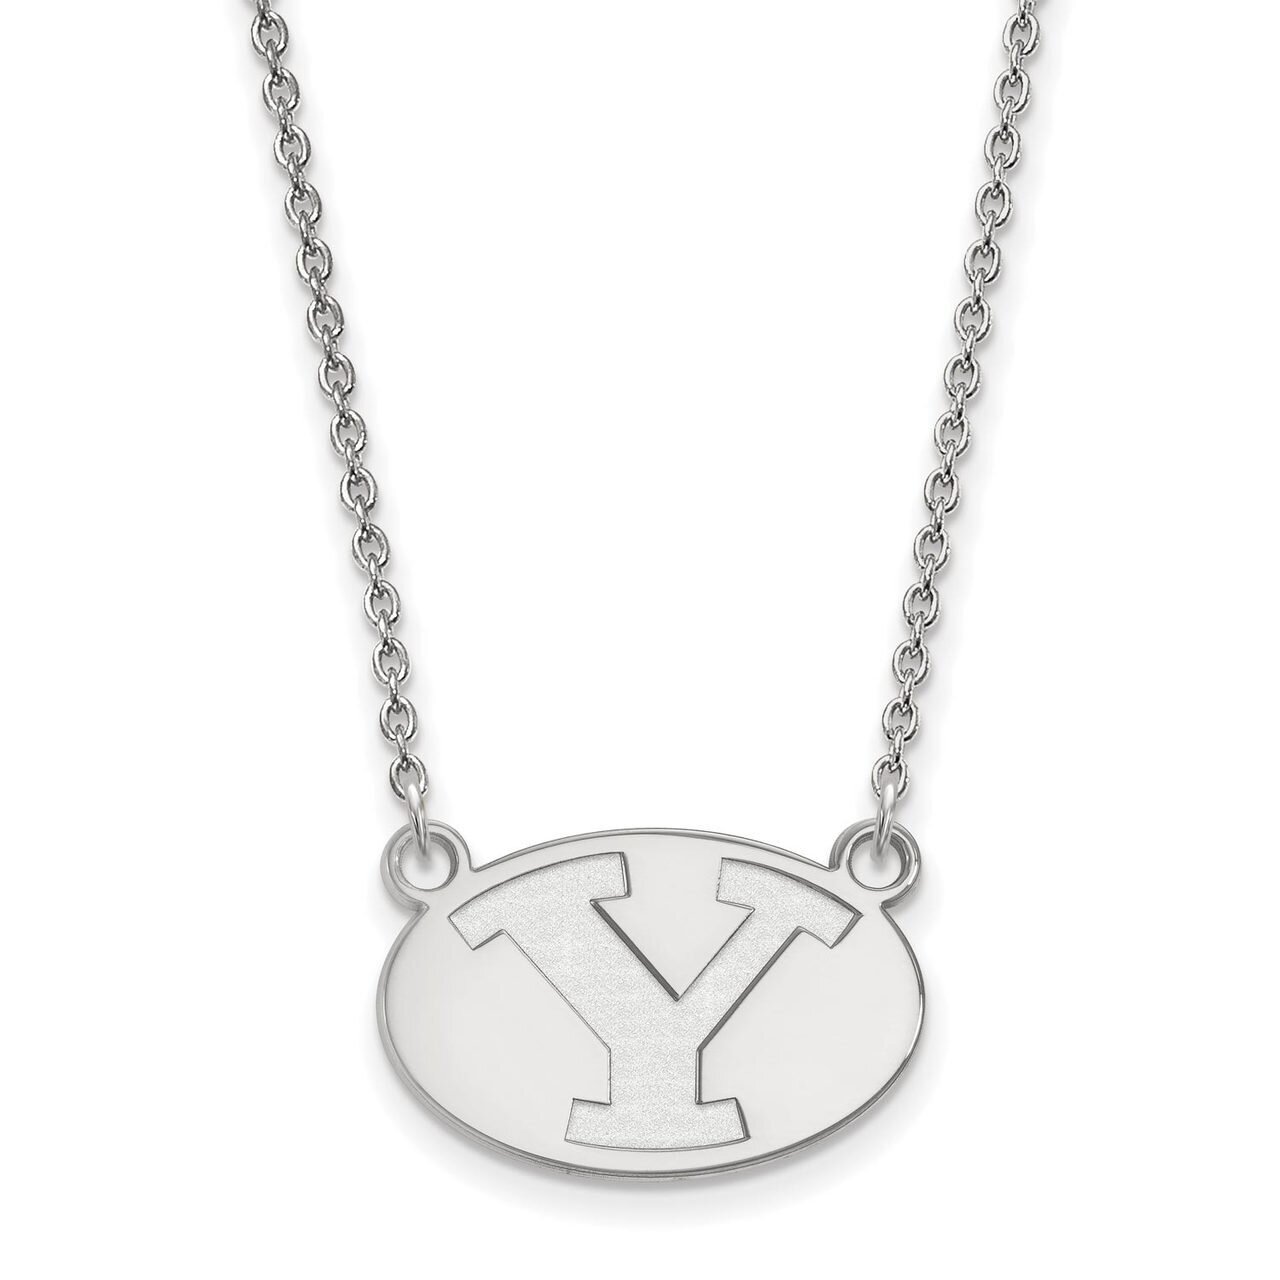 Brigham Young University Small Pendant with Chain Necklace 10k White Gold 1W009BYU-18